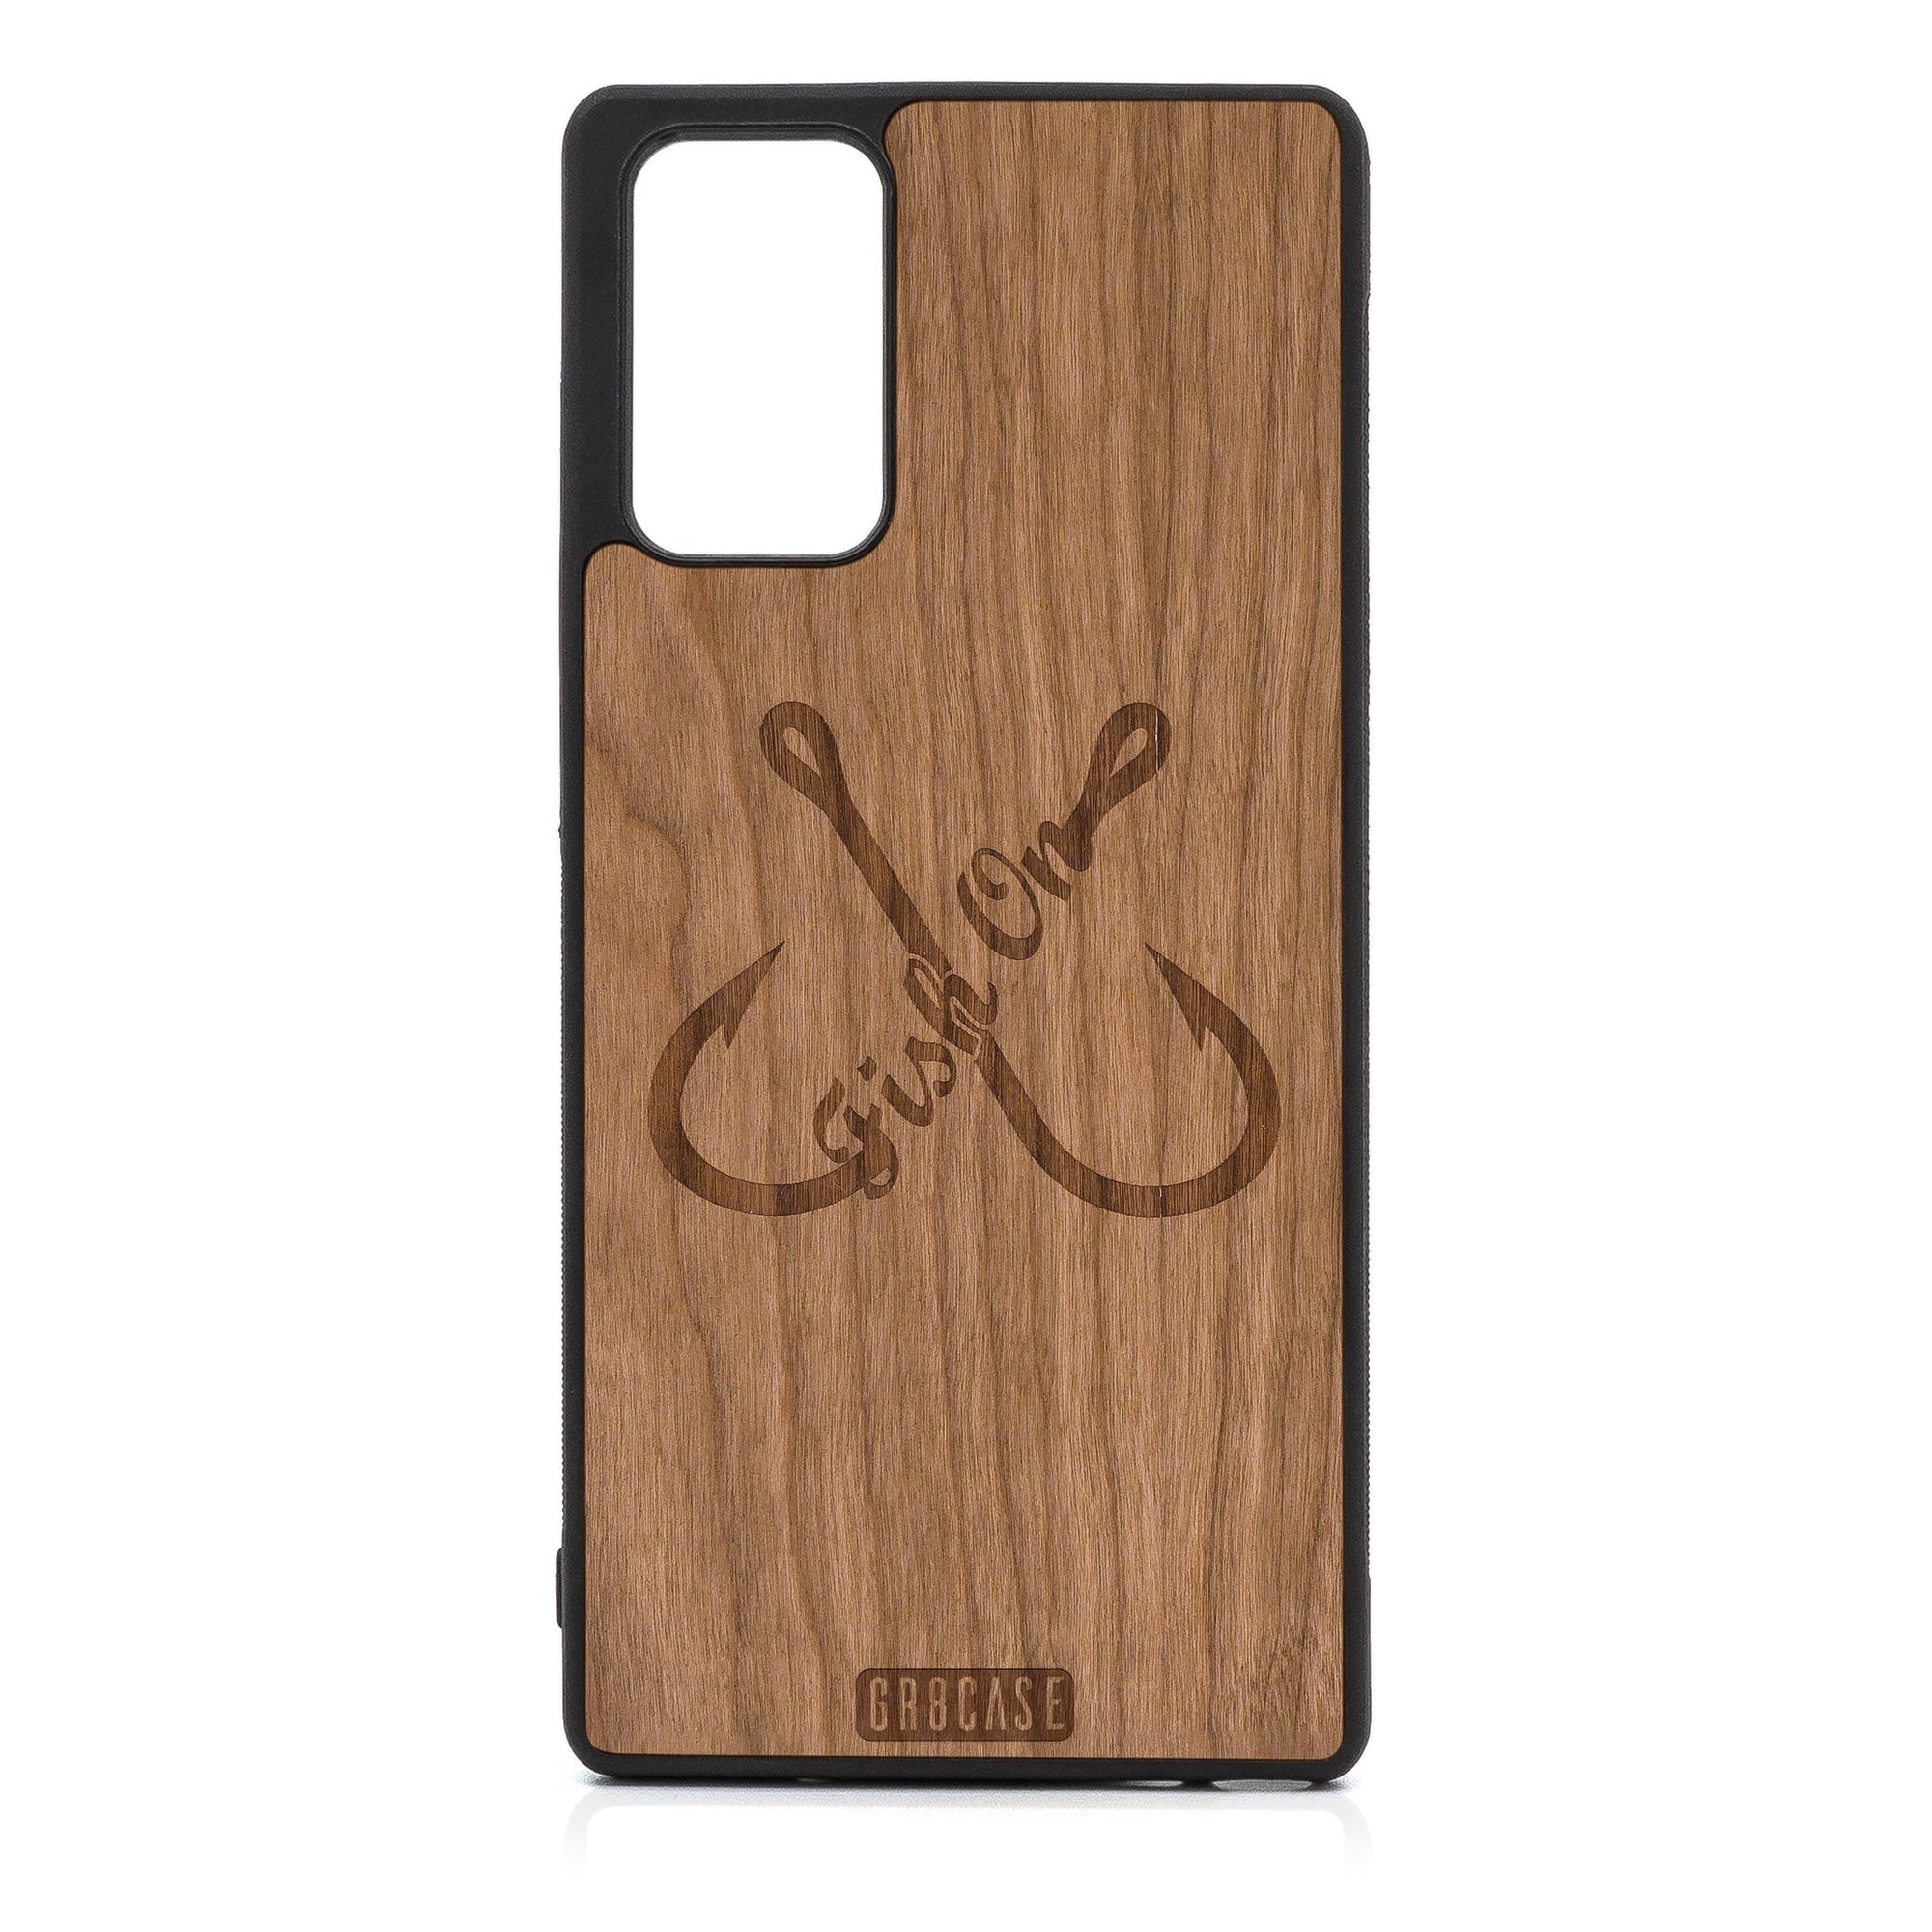 Fish On (Fish Hooks) Design Wood Case For Samsung Galaxy A52 5G